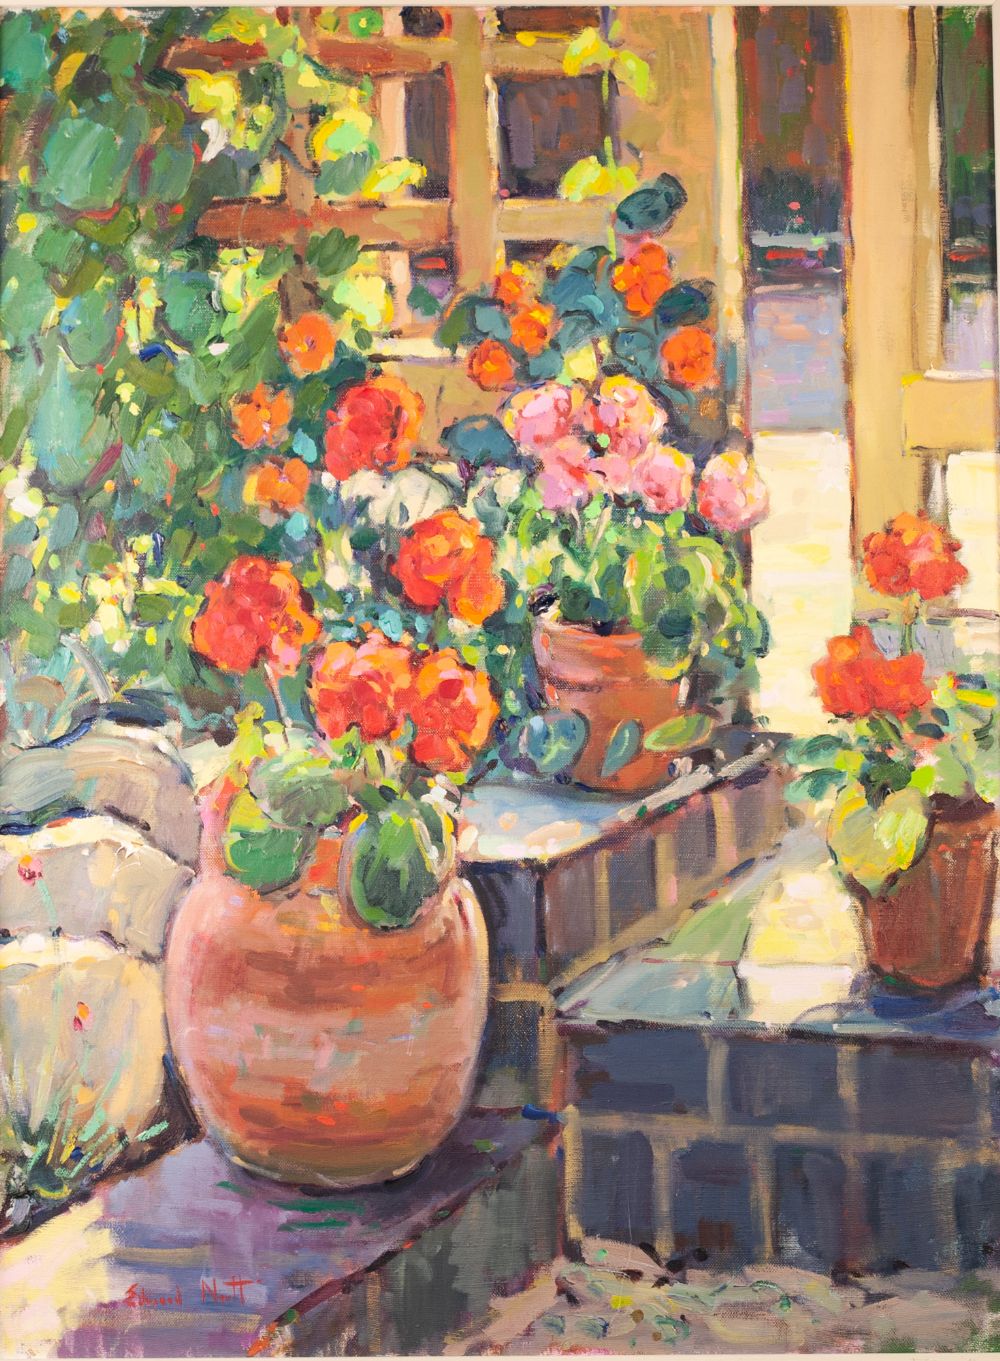 EDWARD NOOTT (b.1965) OIL PAINTING ON CANVAS 'Hot Geraniums' Signed lower left titled on canvas